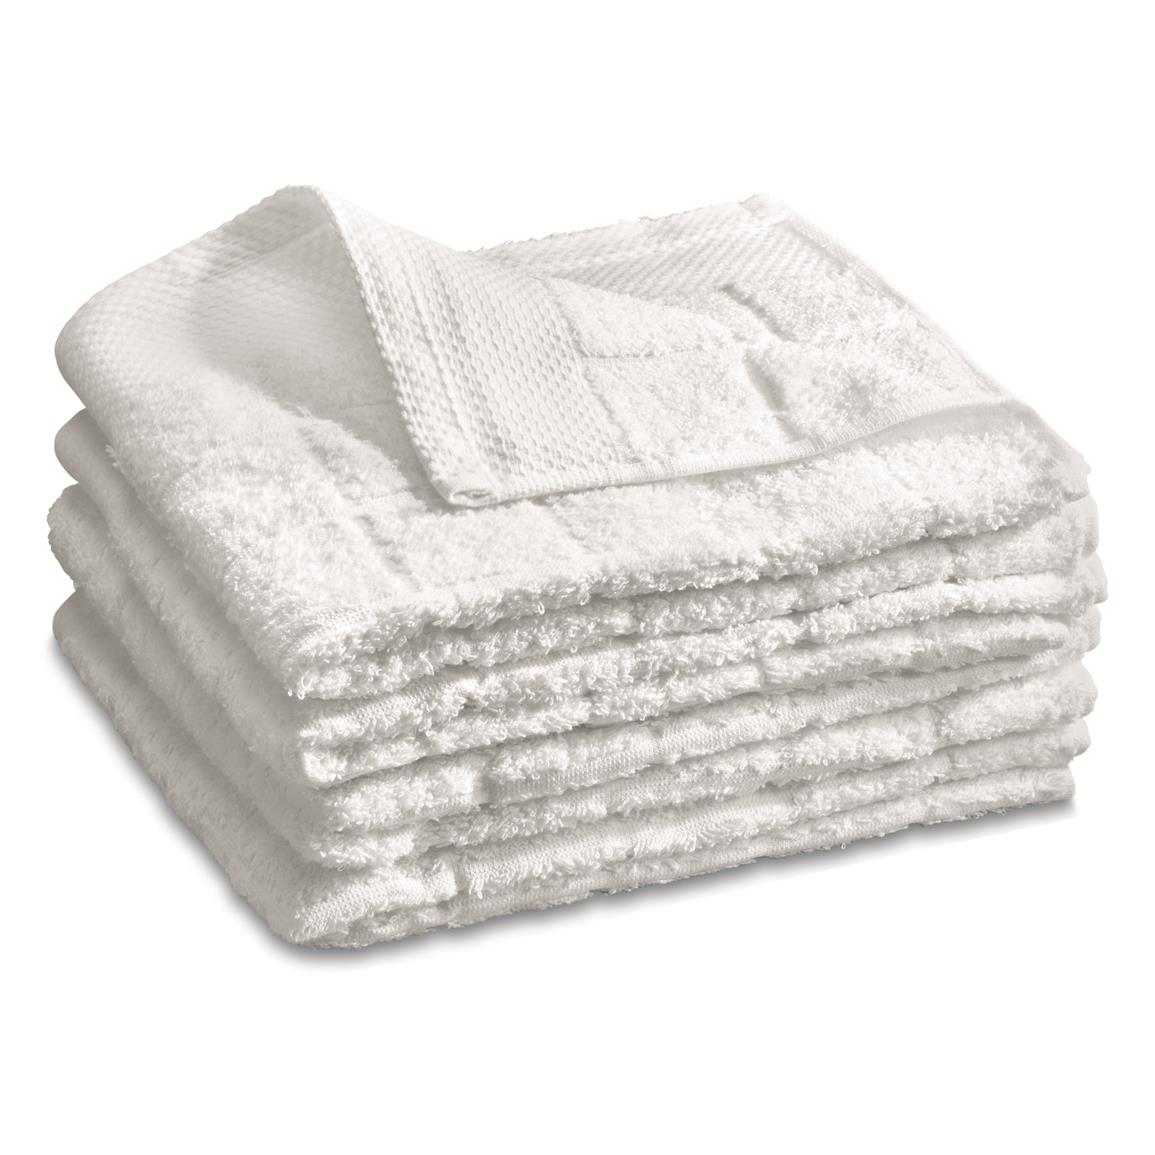 Italian Military Surplus Terry Cloth Towels, 4 Pack, New